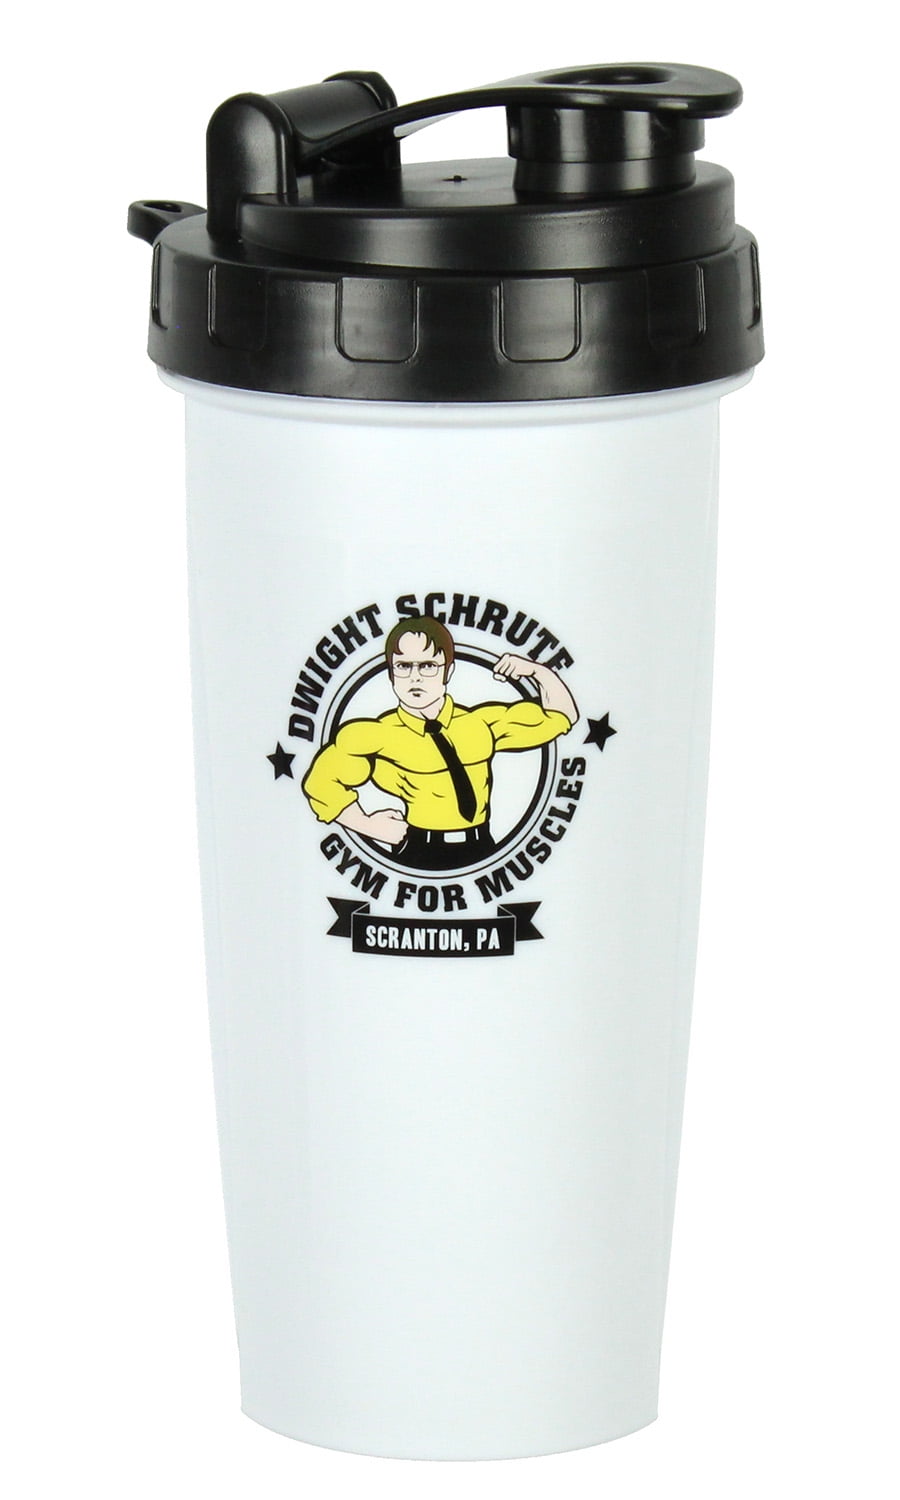 Shaker Bottle with compartments - Athlete Career Placement, LLC